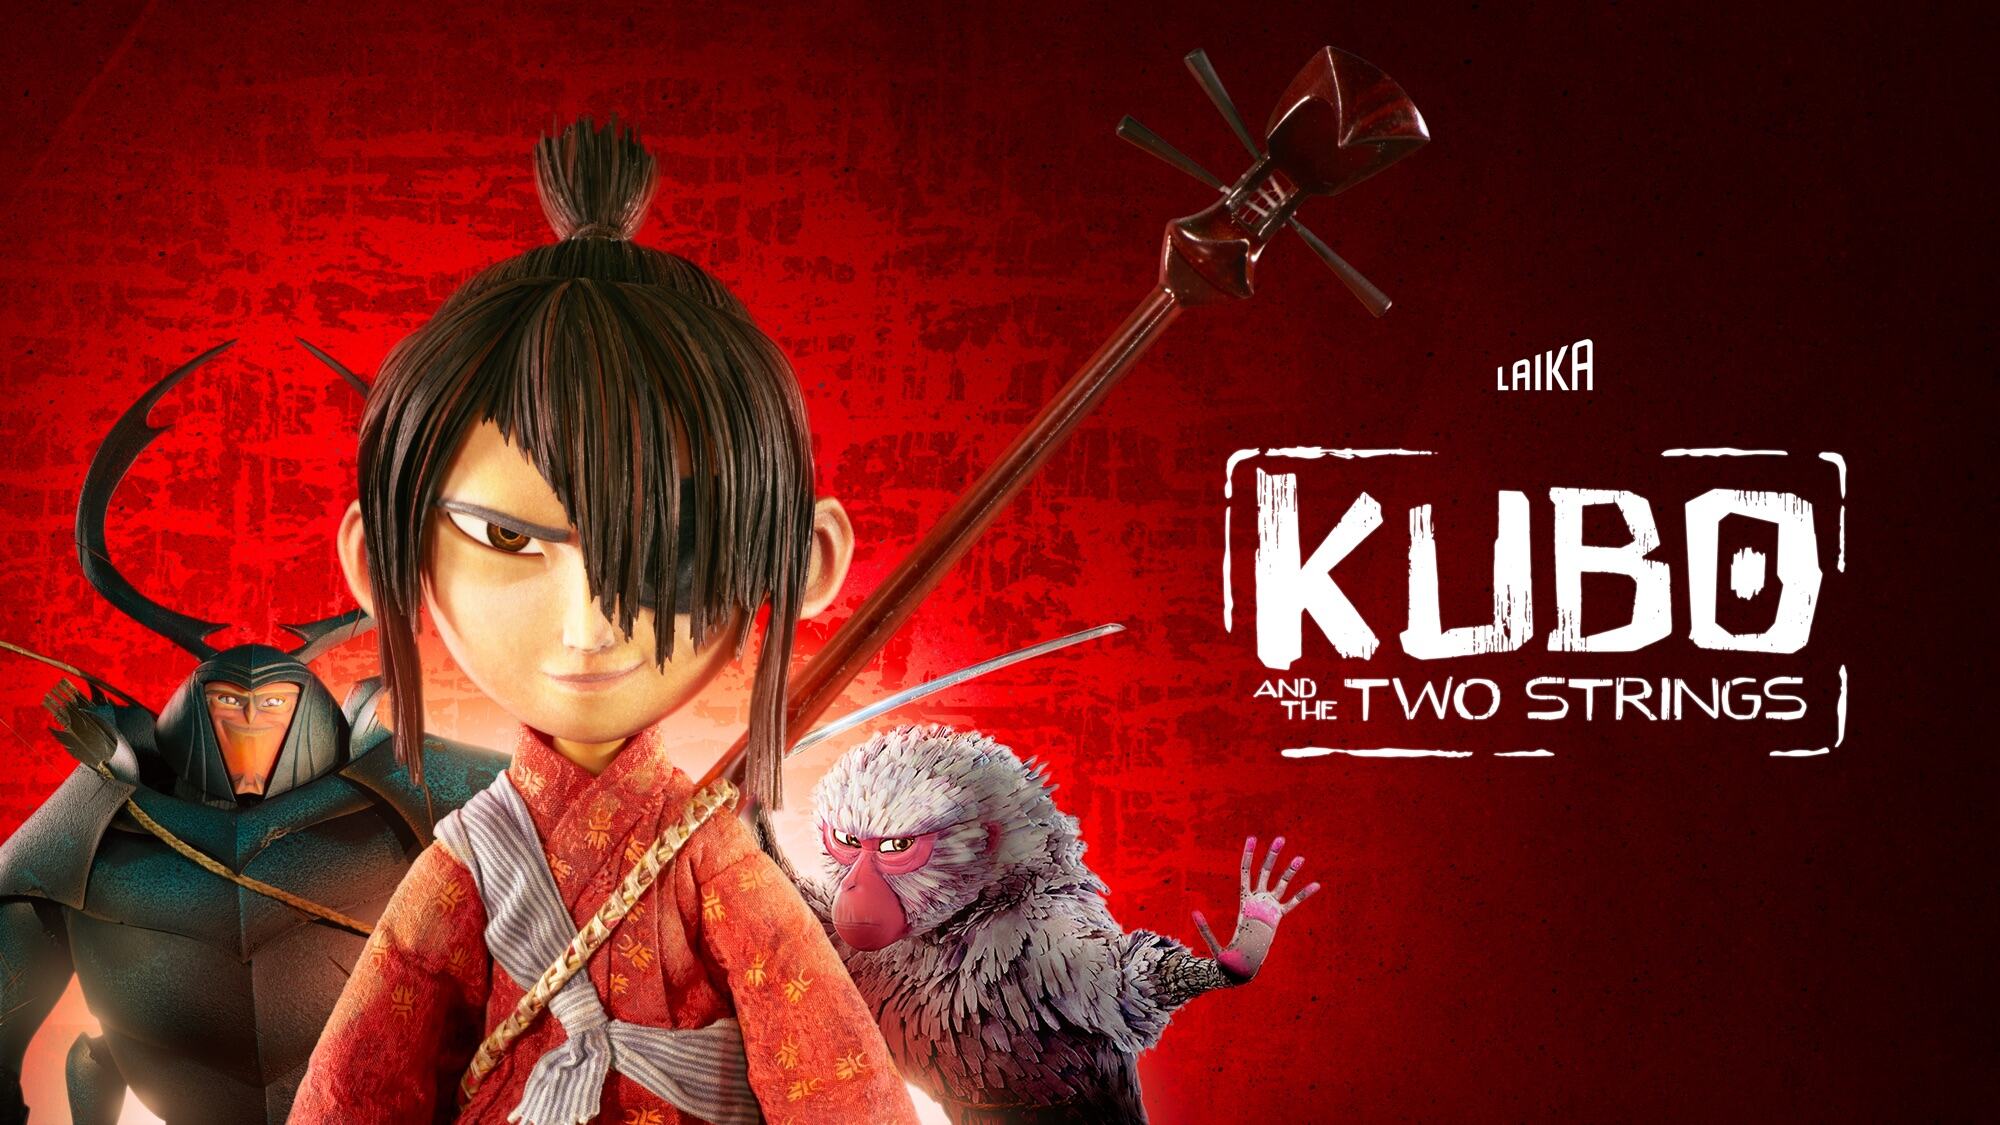 38-facts-about-the-movie-kubo-and-the-two-strings